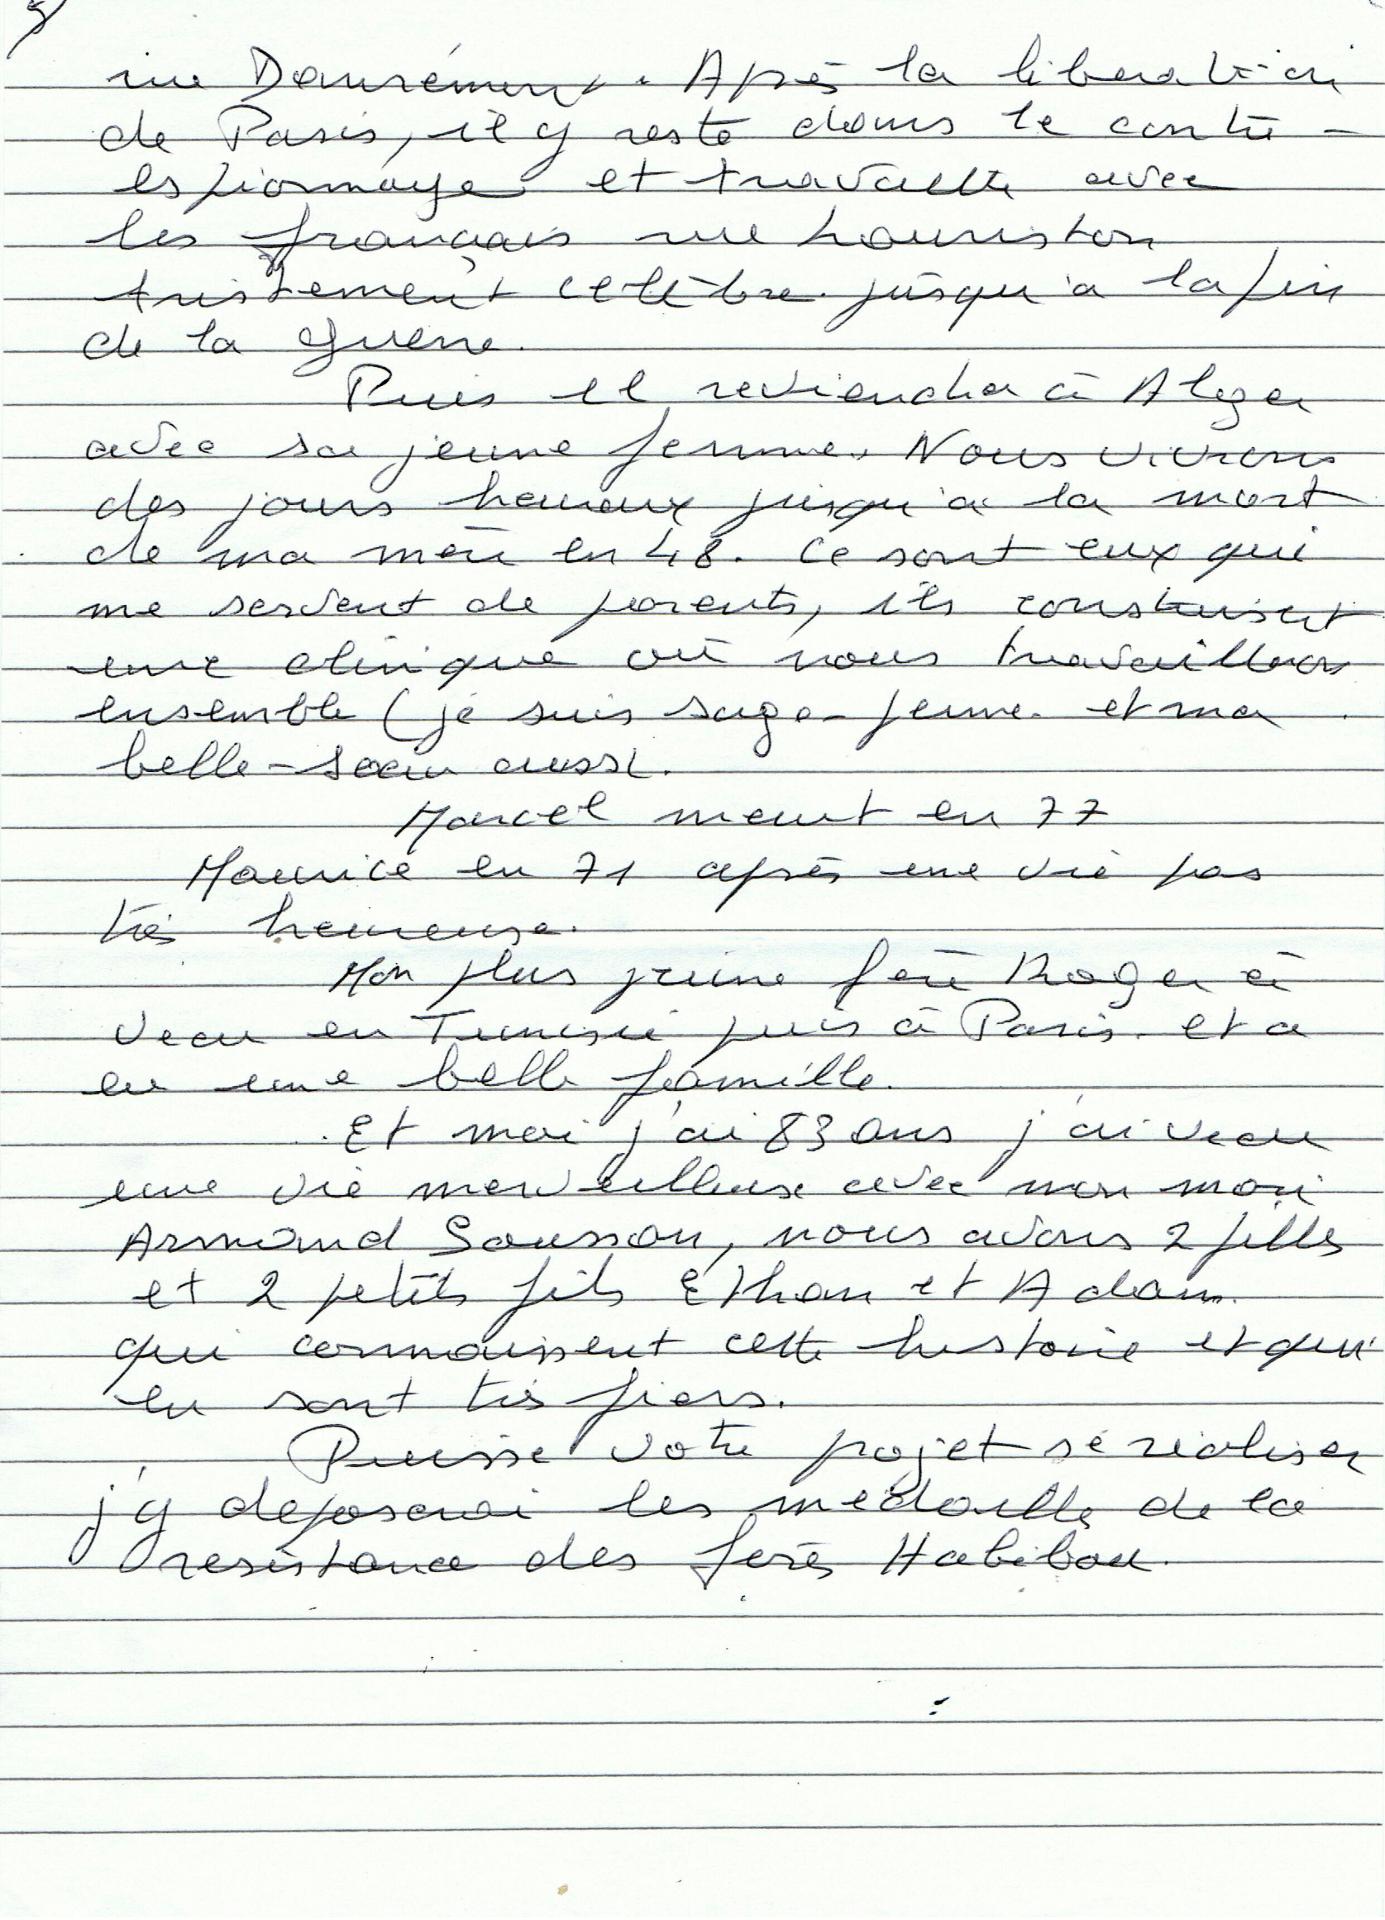 Suzanne soussan page 5